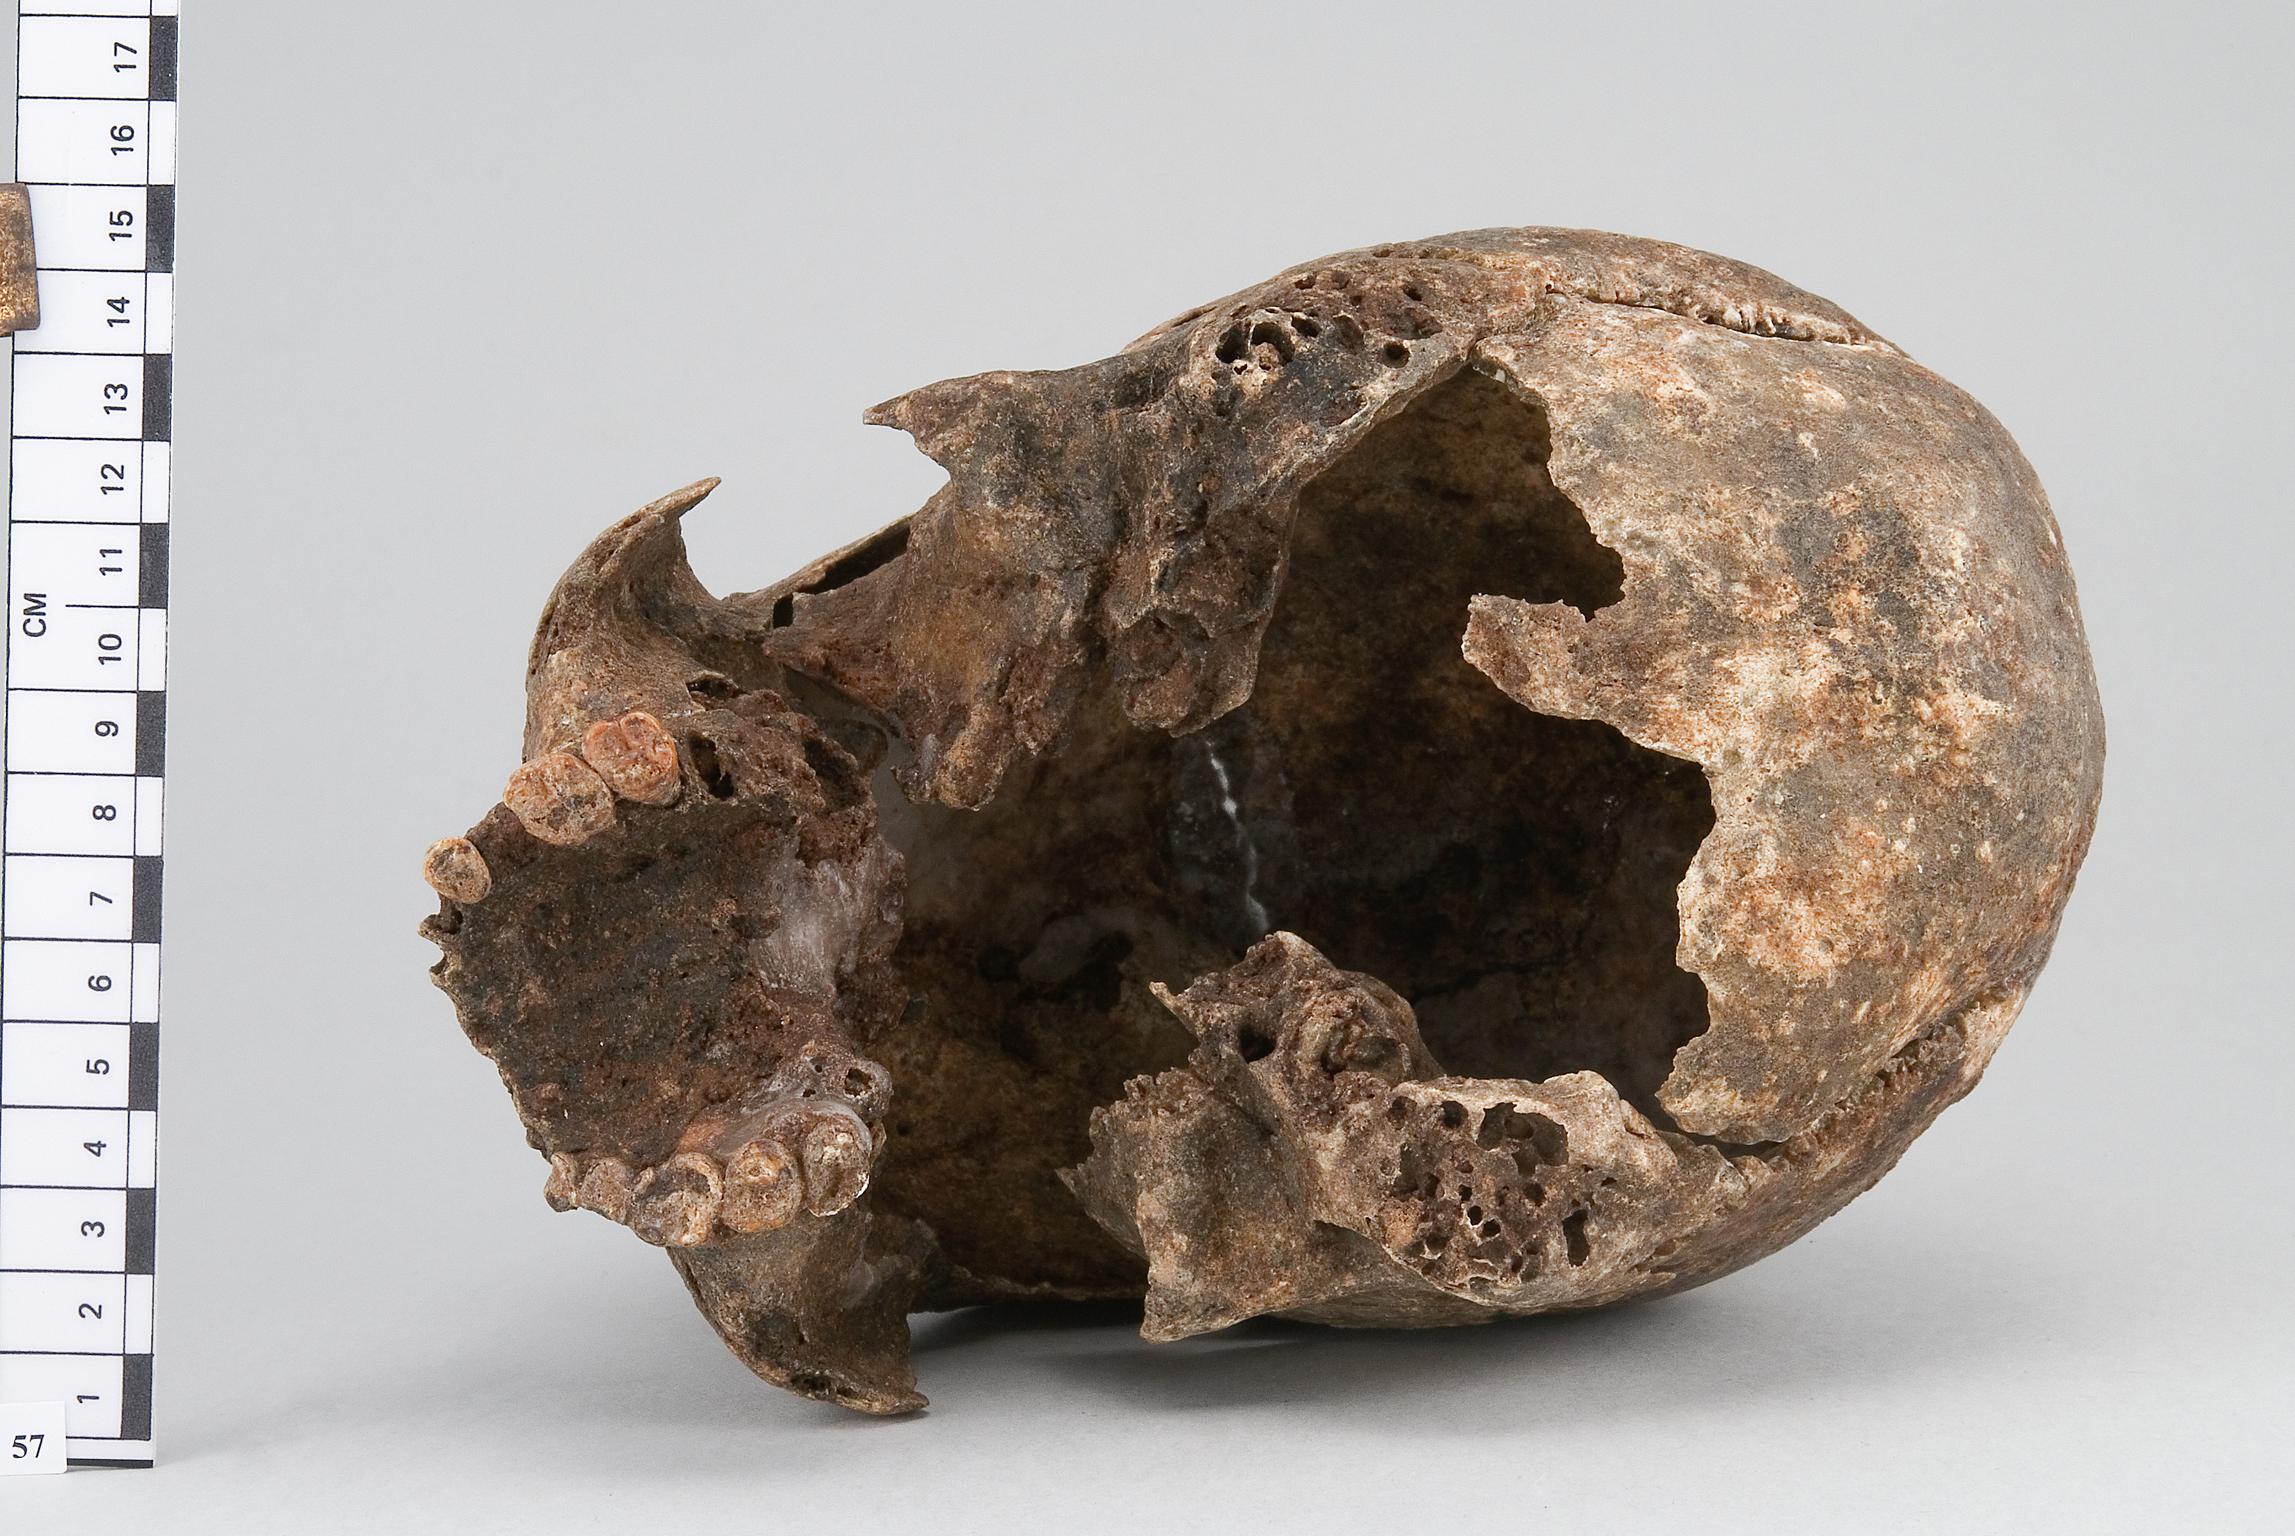 Neolithic human remains